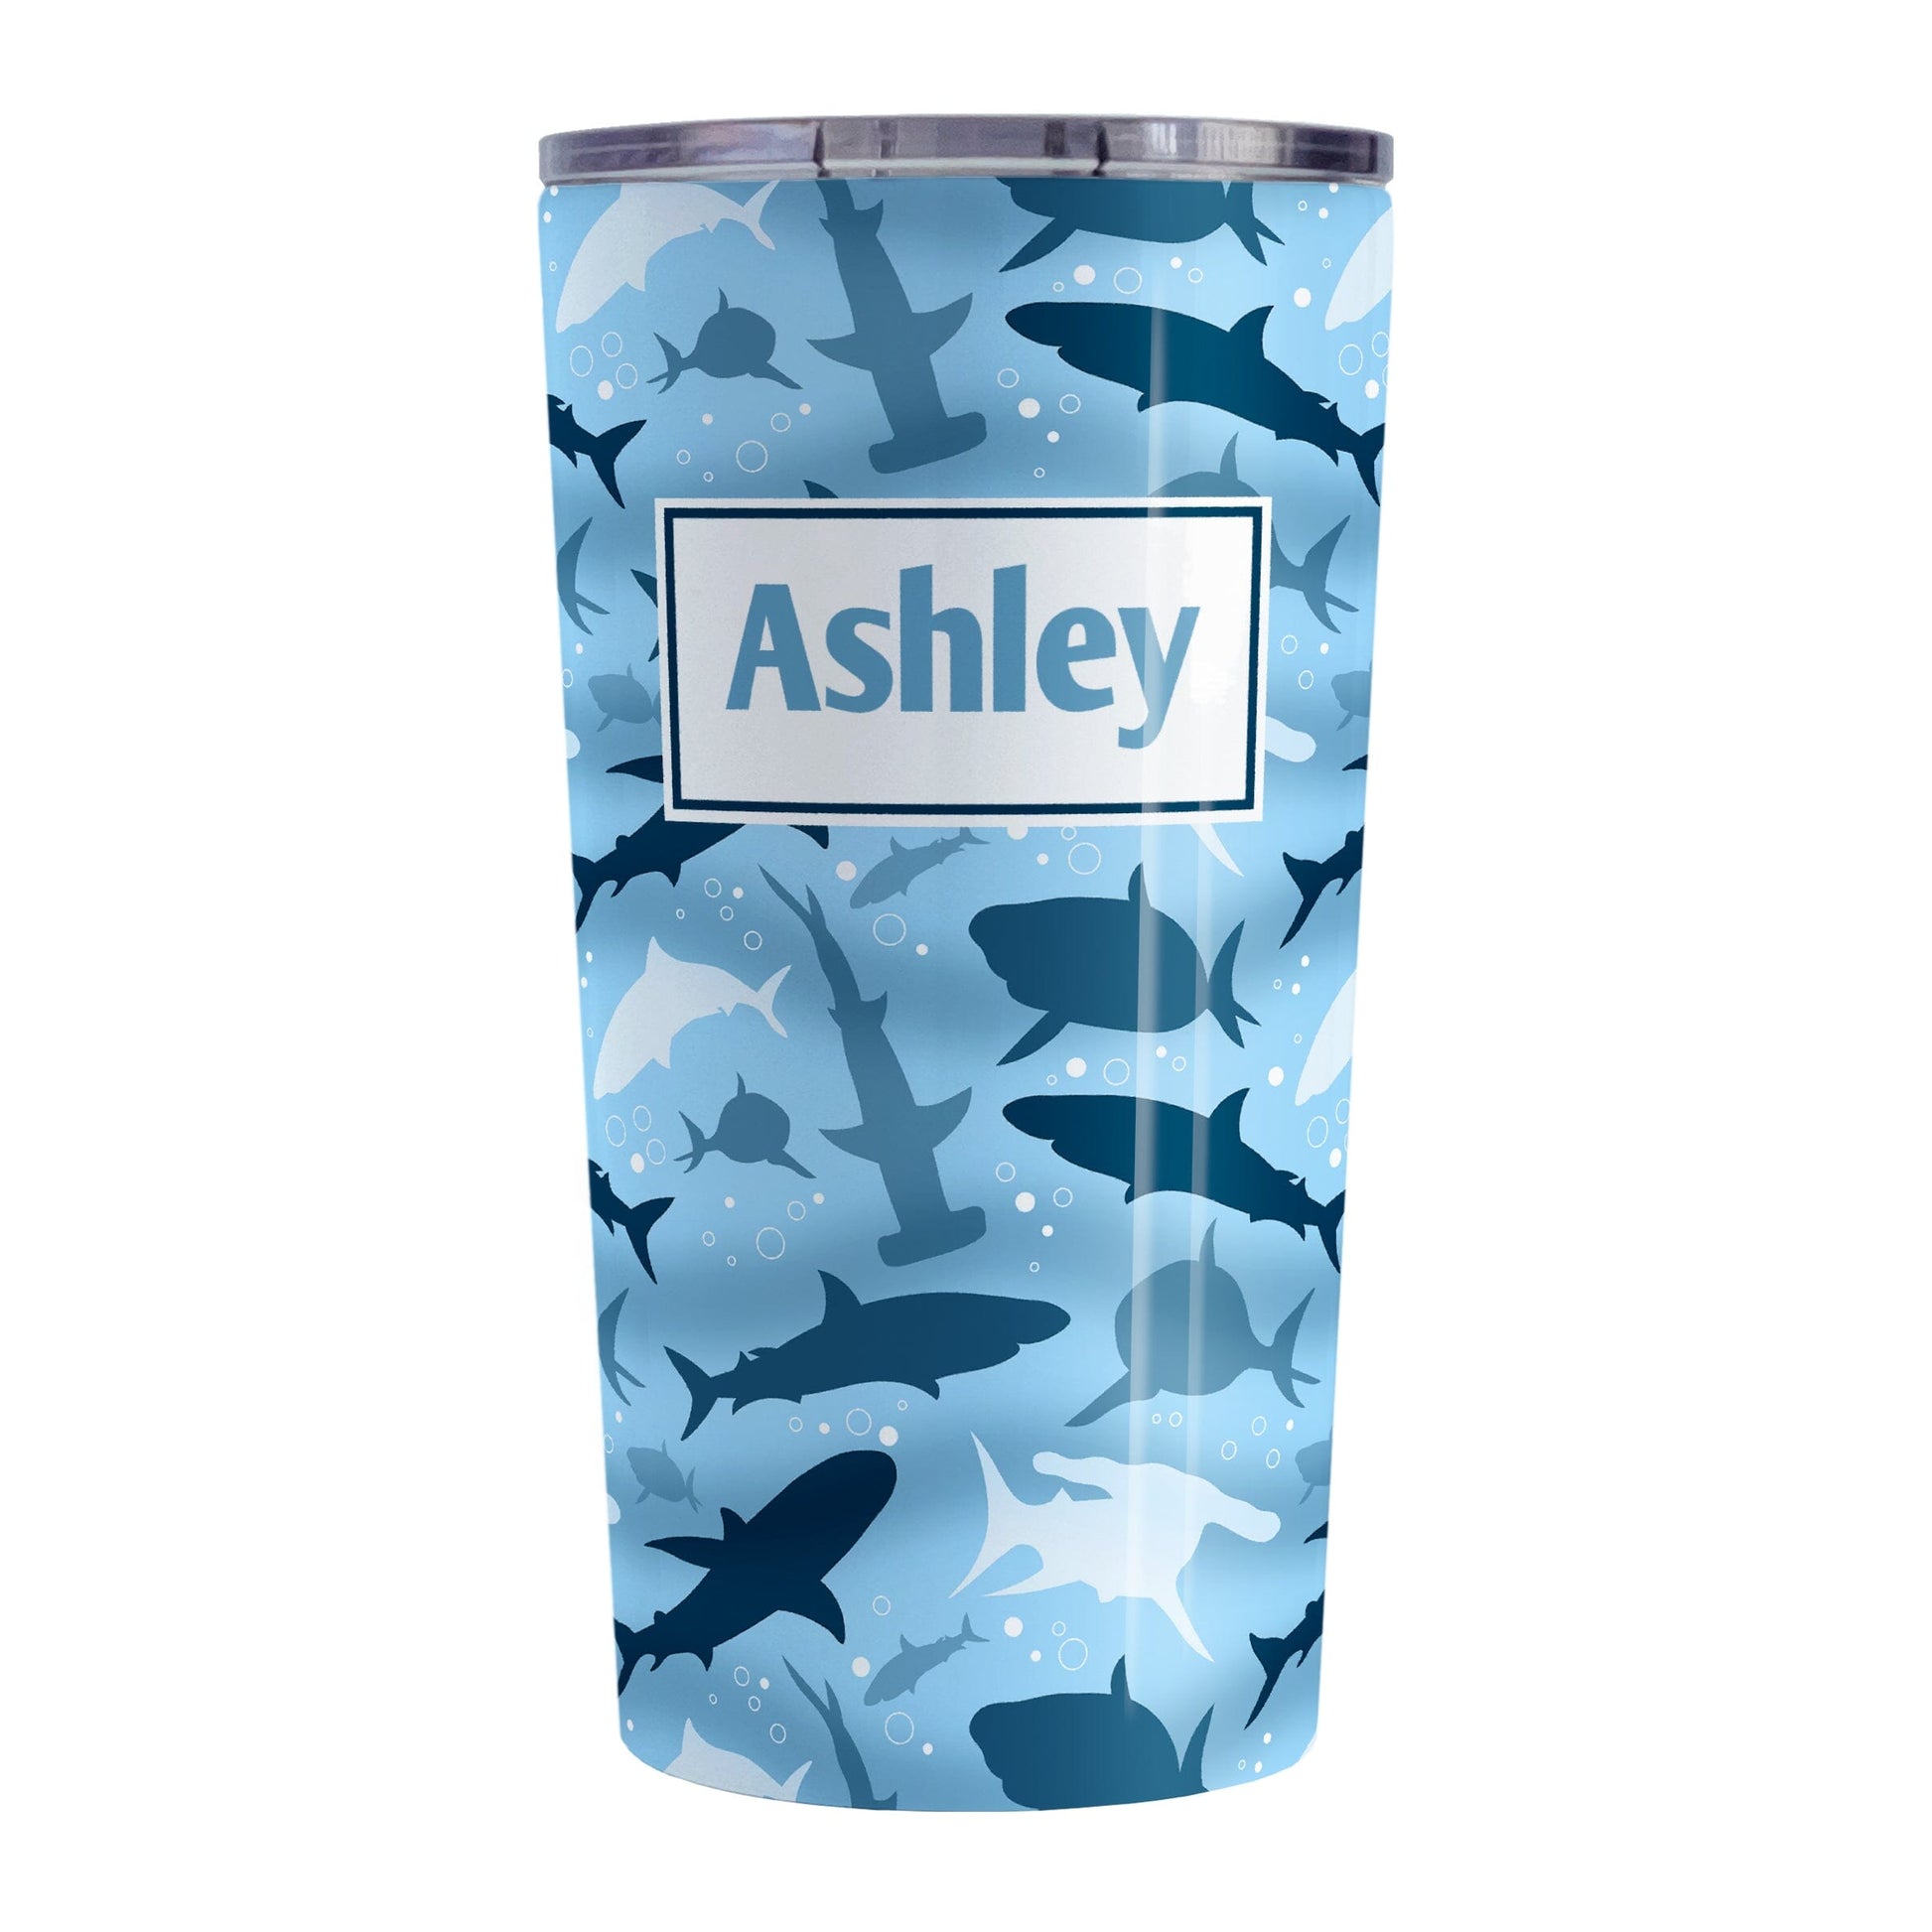 Personalized Blue Frenzy Sharks Tumbler Cup (20oz) at Amy's Coffee Mugs. A stainless steel insulated tumbler cup designed with a pattern of sharks in different shades of blue, in a frenzy deep beneath the water, that wraps around the cup. Your personalized name is custom printed in blue over the shark pattern.